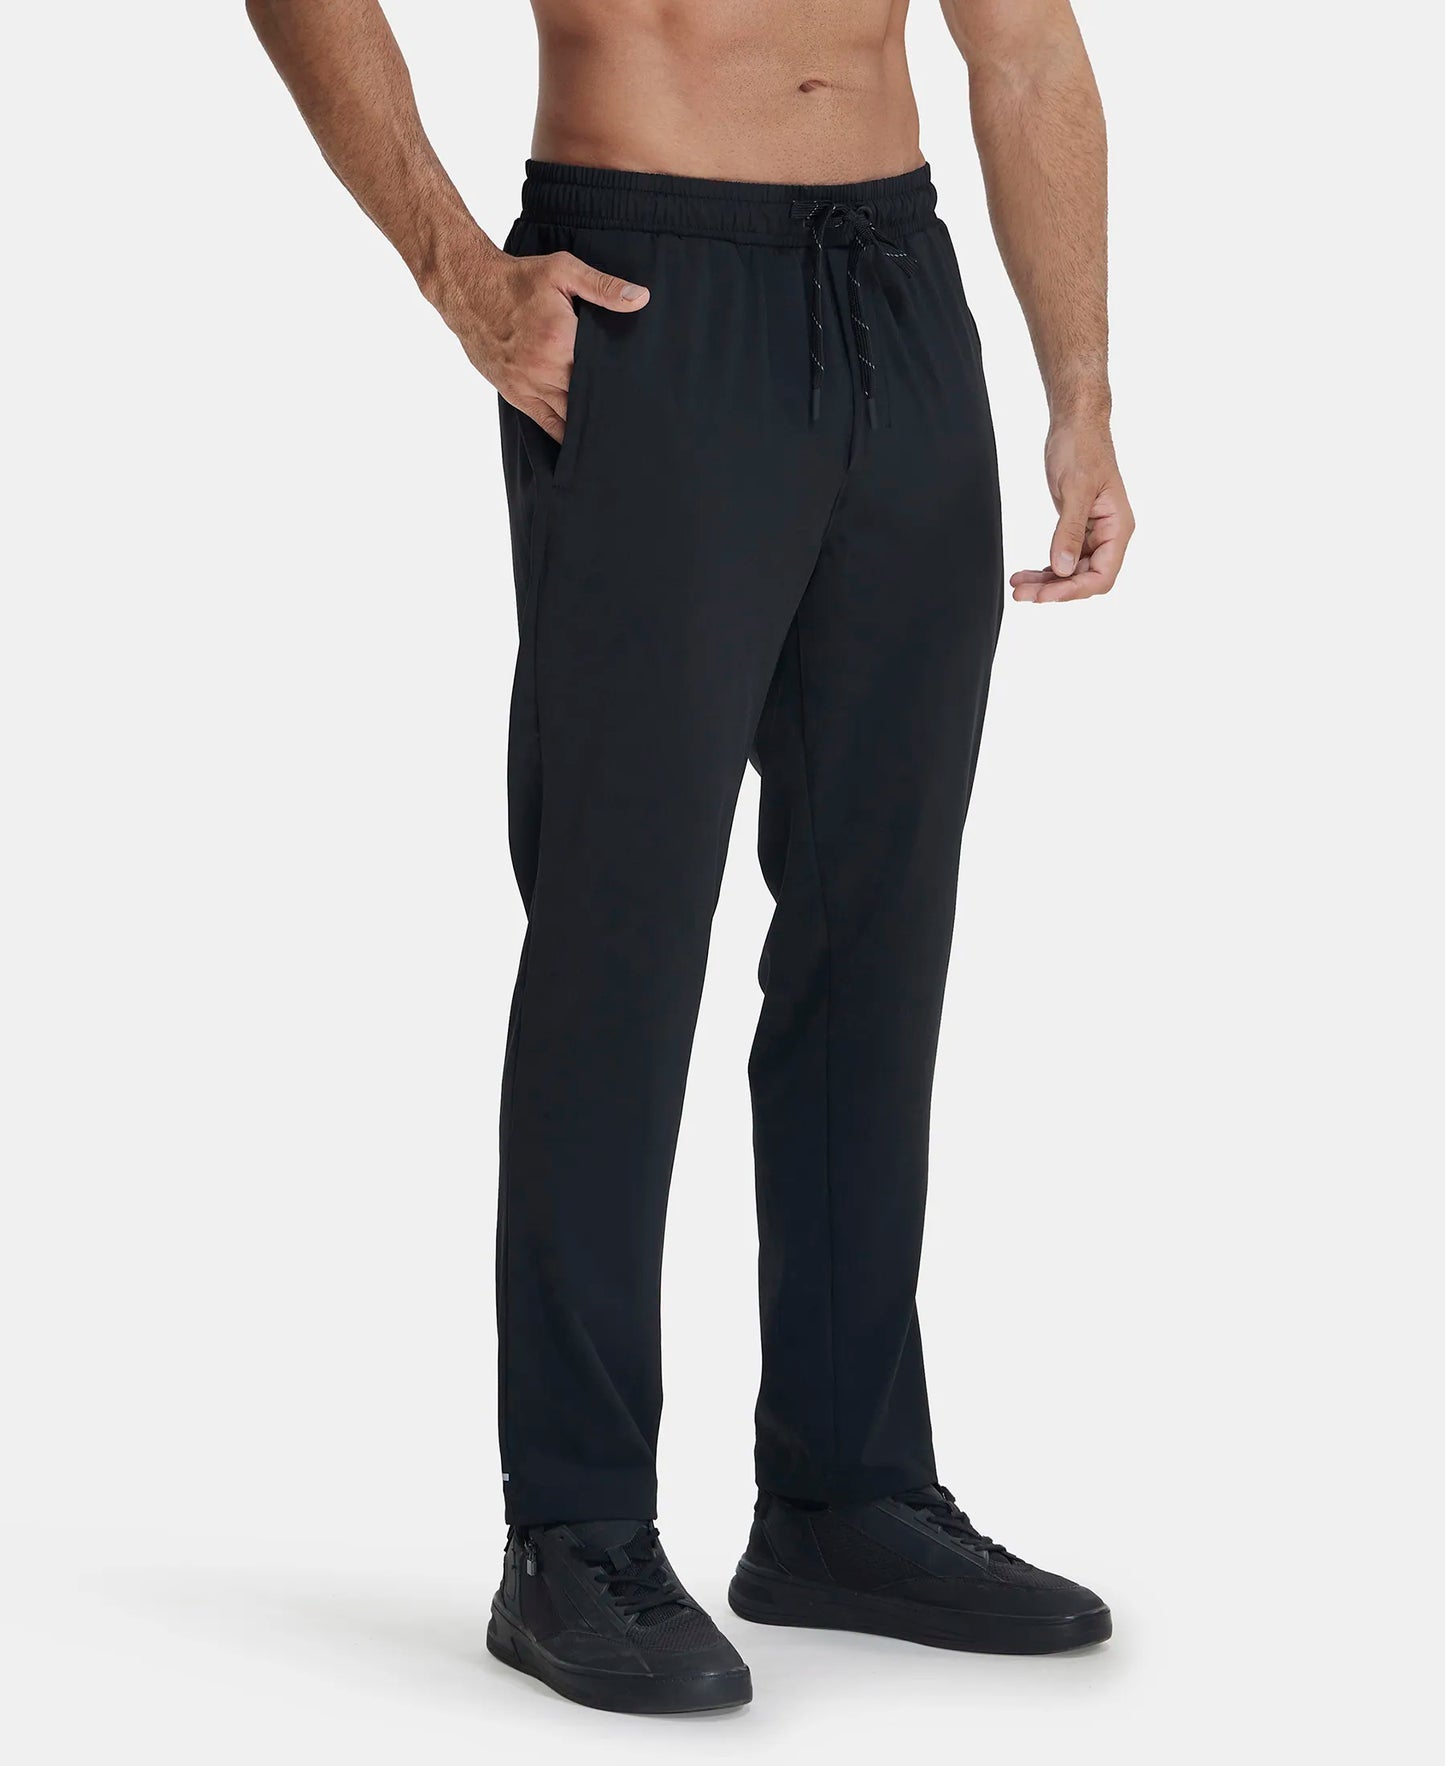 Recycled Microfiber Elastane Stretch Trackpant with Zipper Pockets and StayFresh Treatment - Black-2